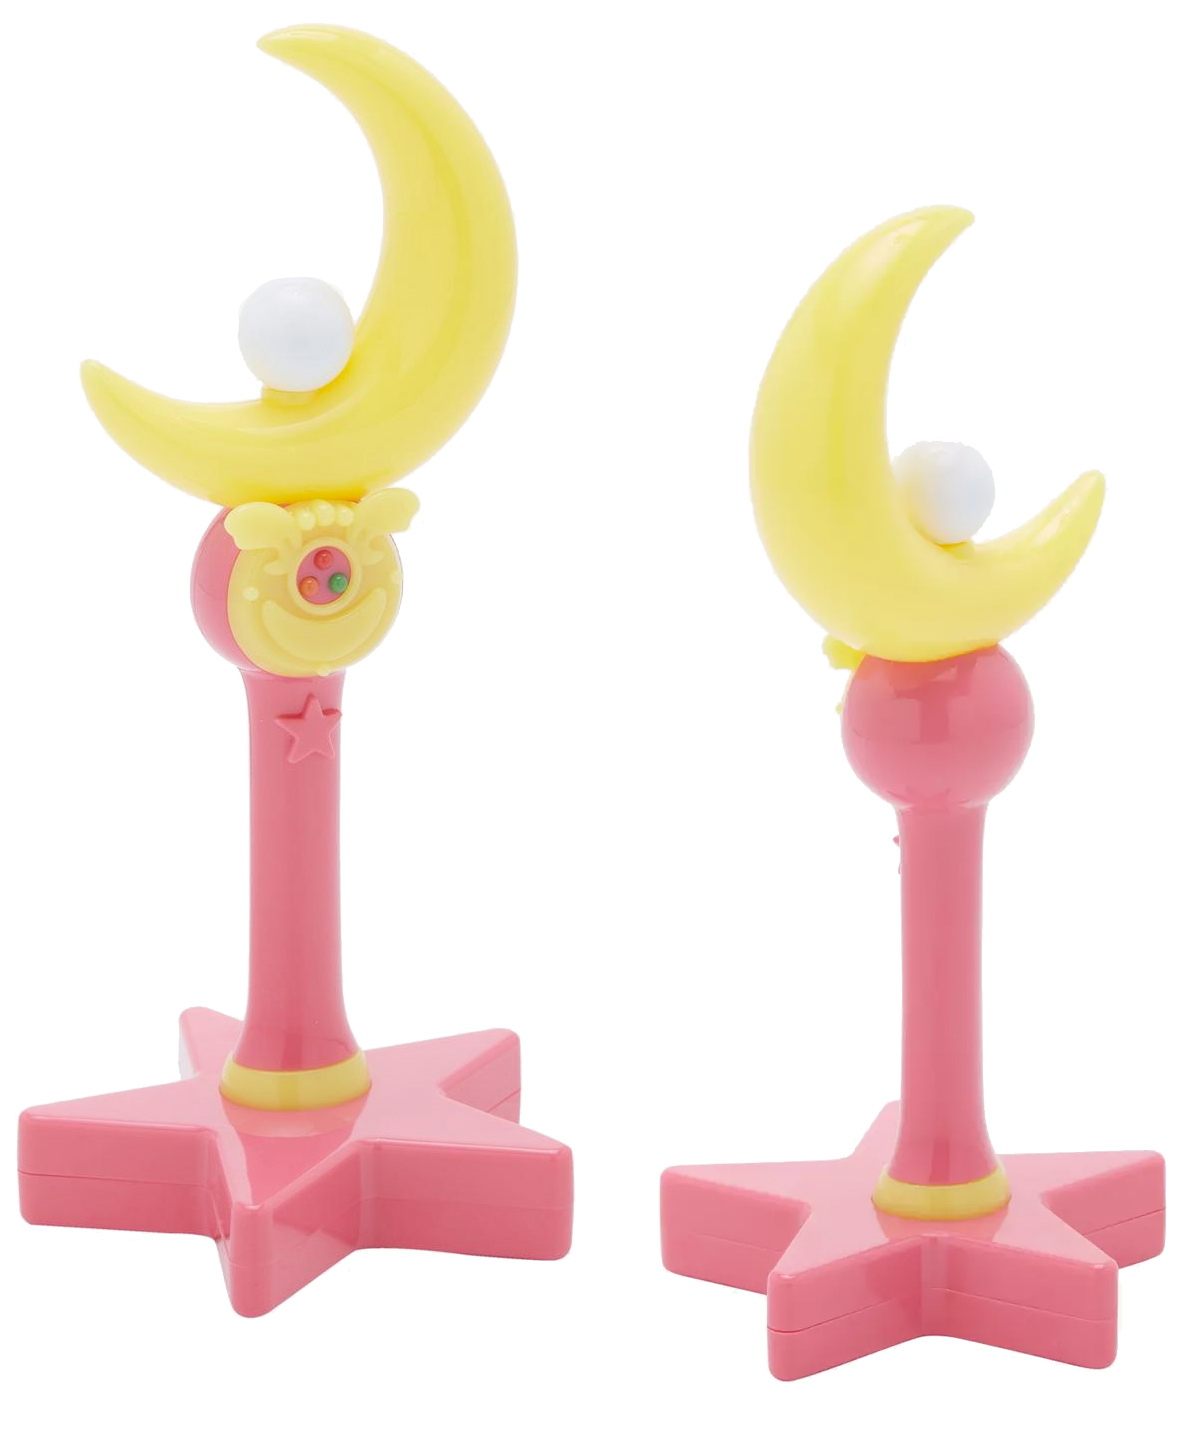 Moon Stick Figural Lamp from the Anime Sailor Moon